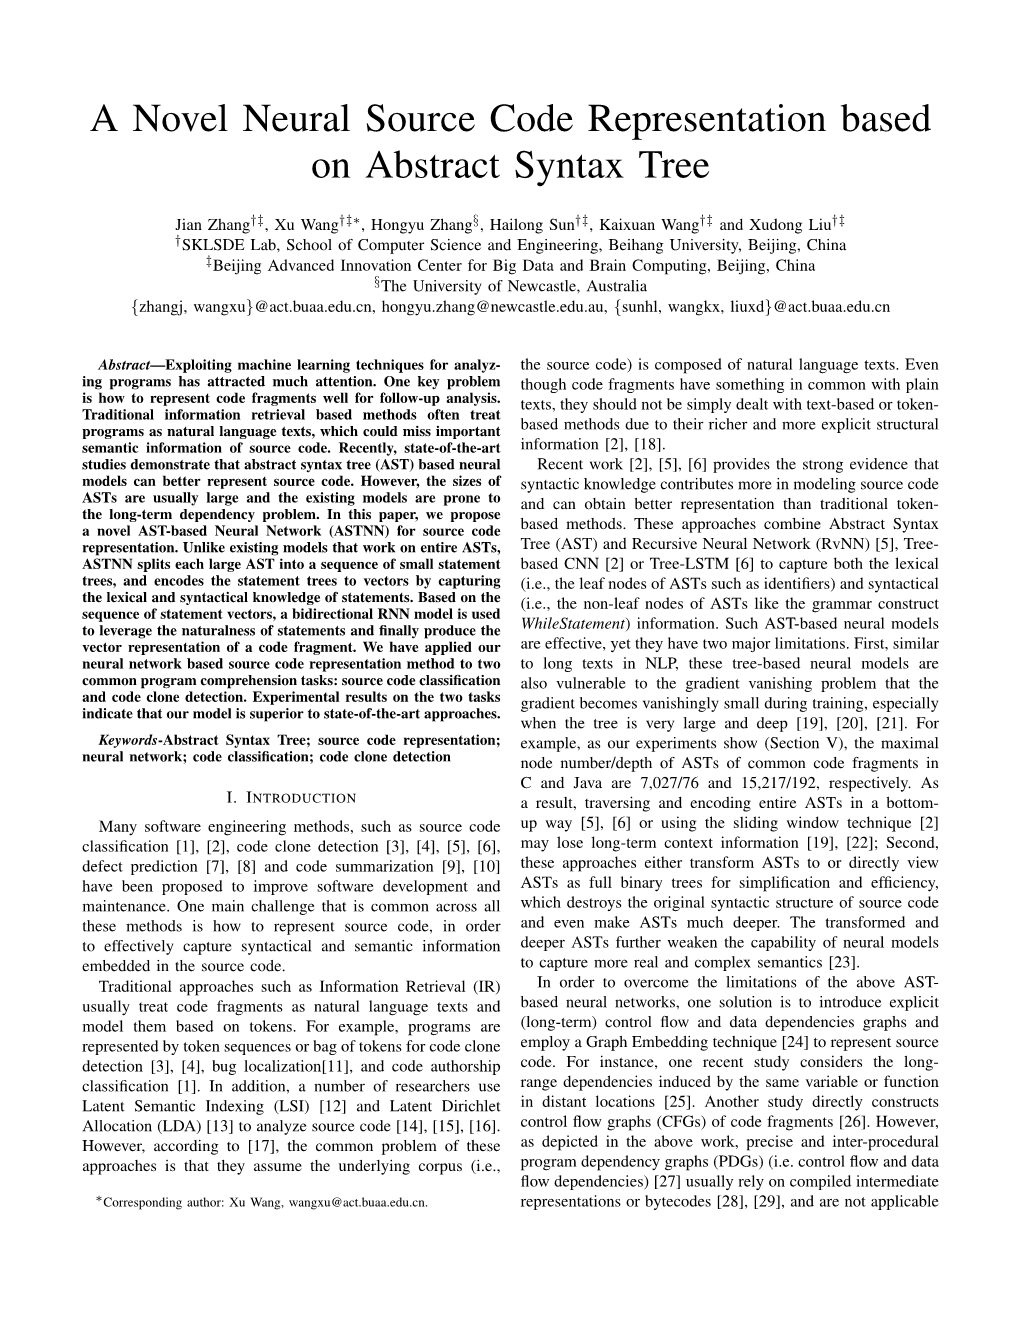 A Novel Neural Source Code Representation Based on Abstract Syntax Tree